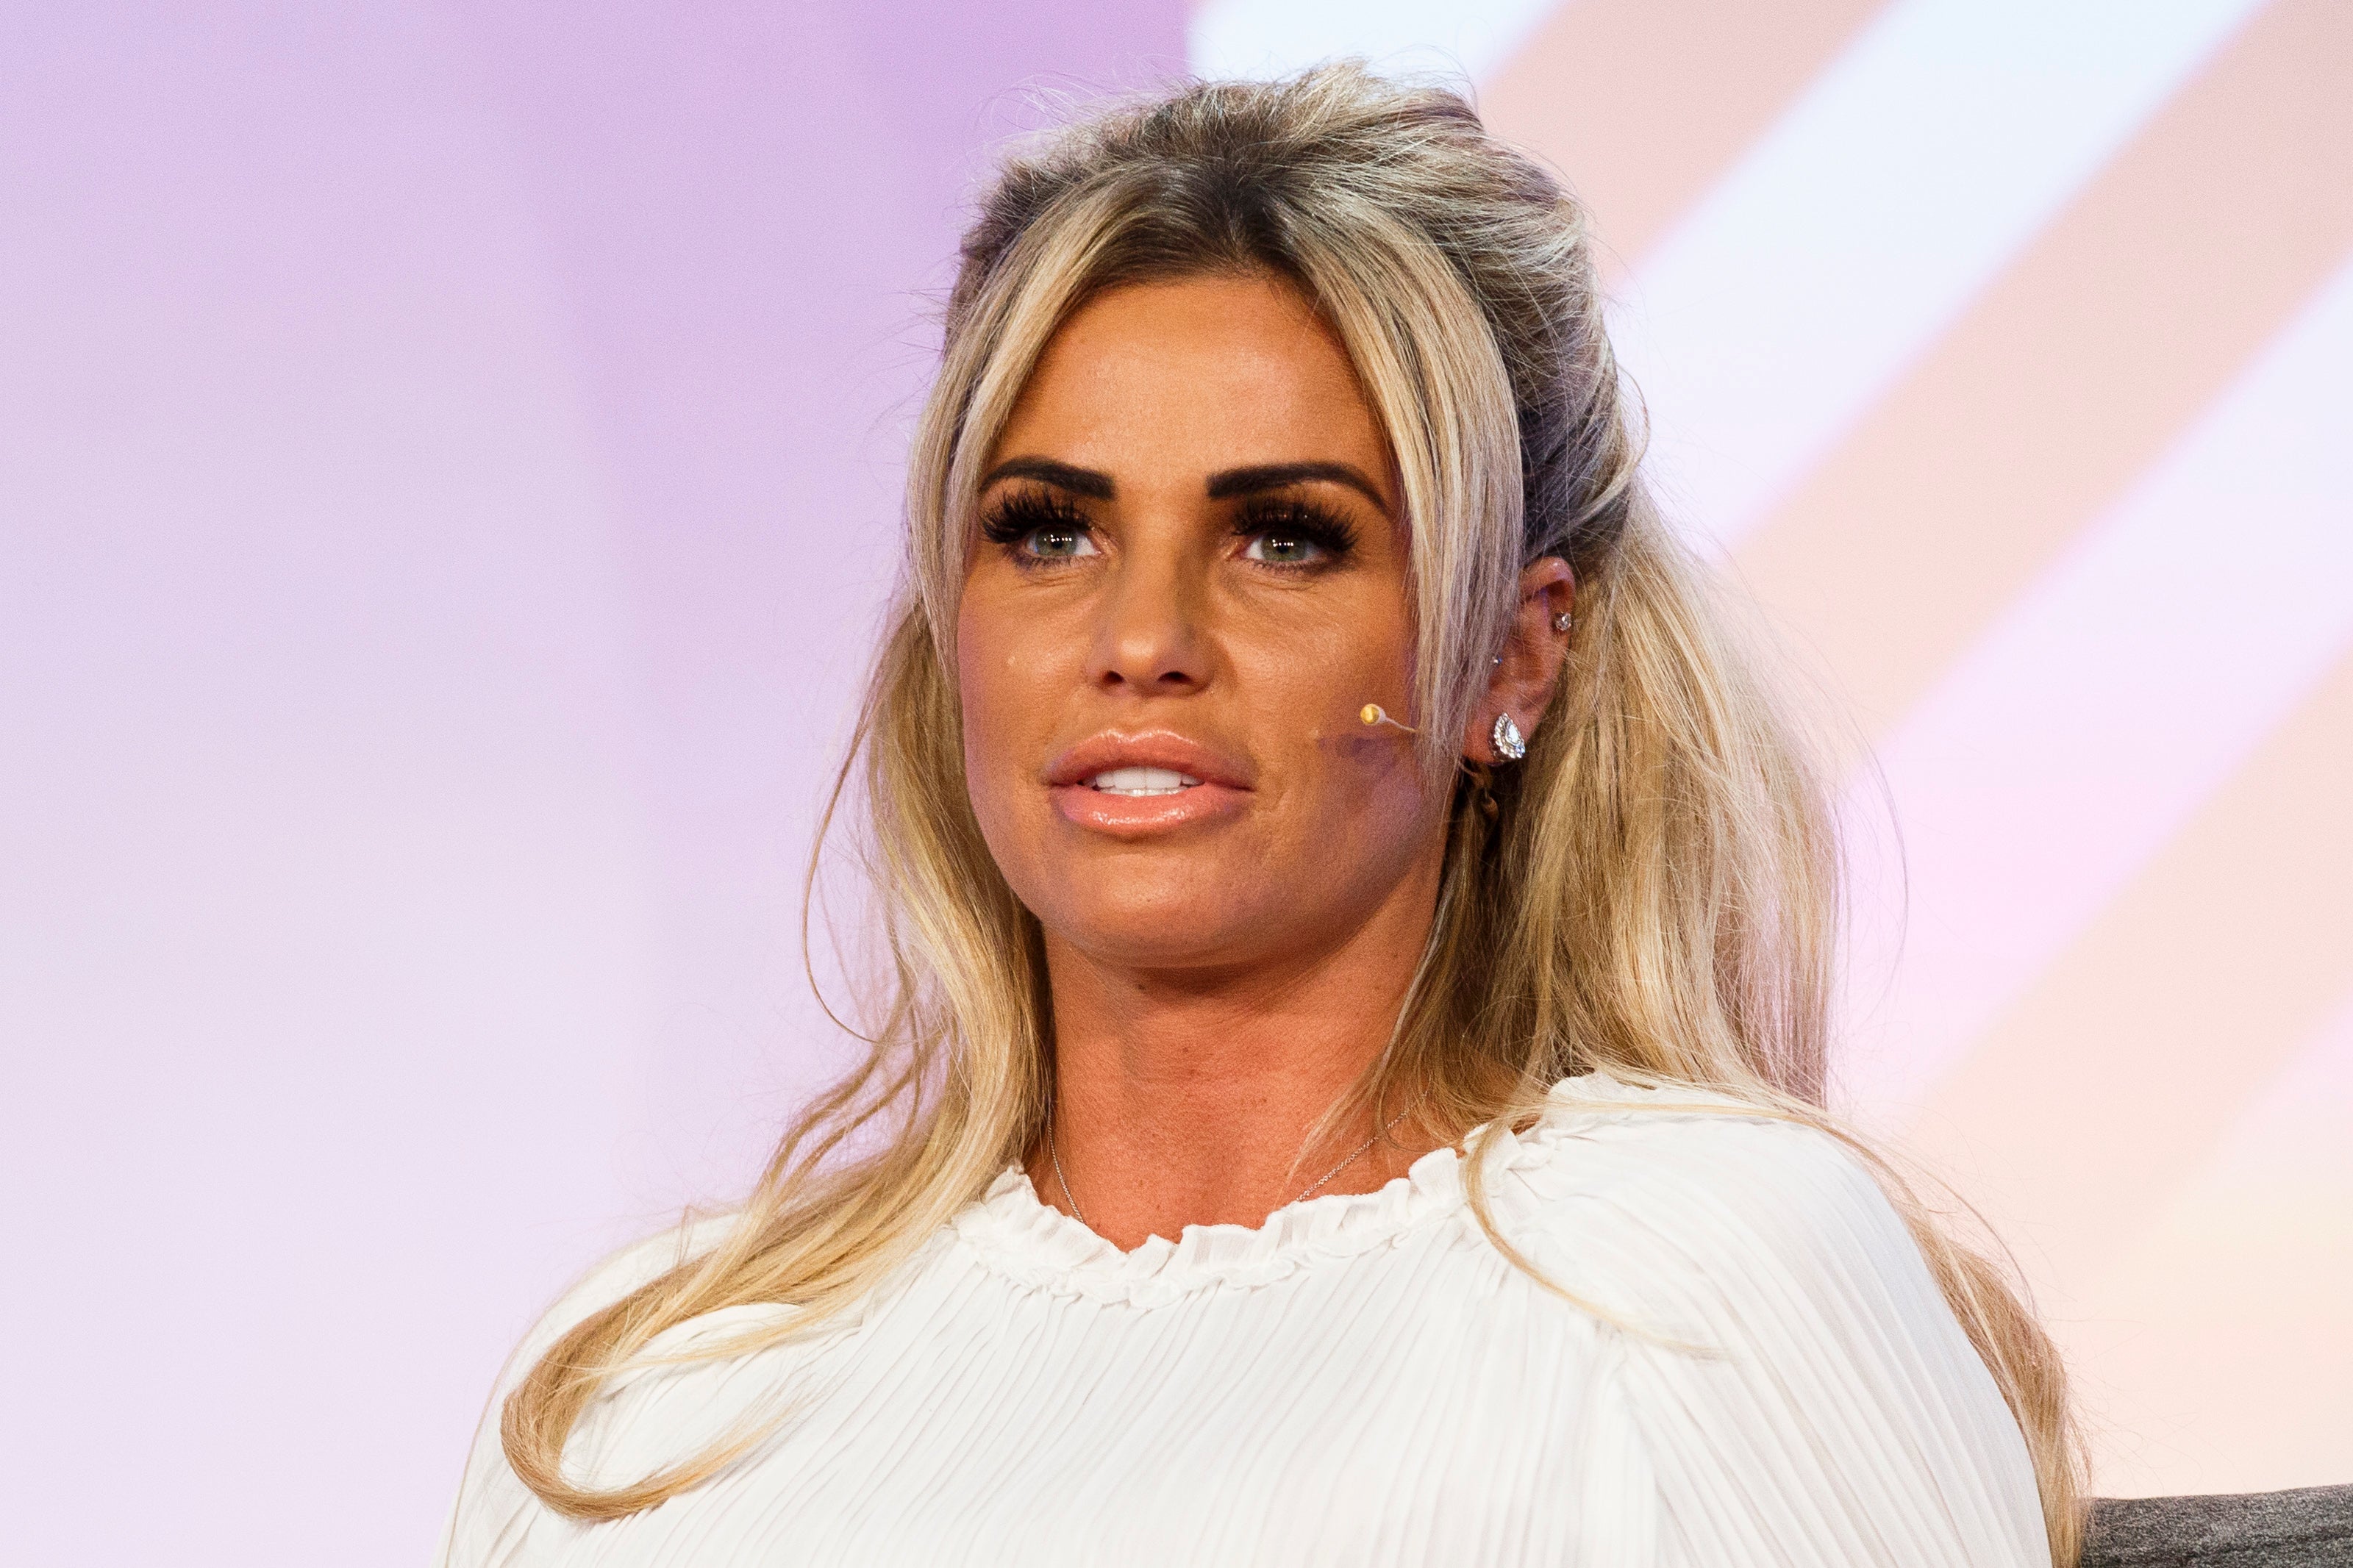 Katie Price currently owes HMRC over £760,000